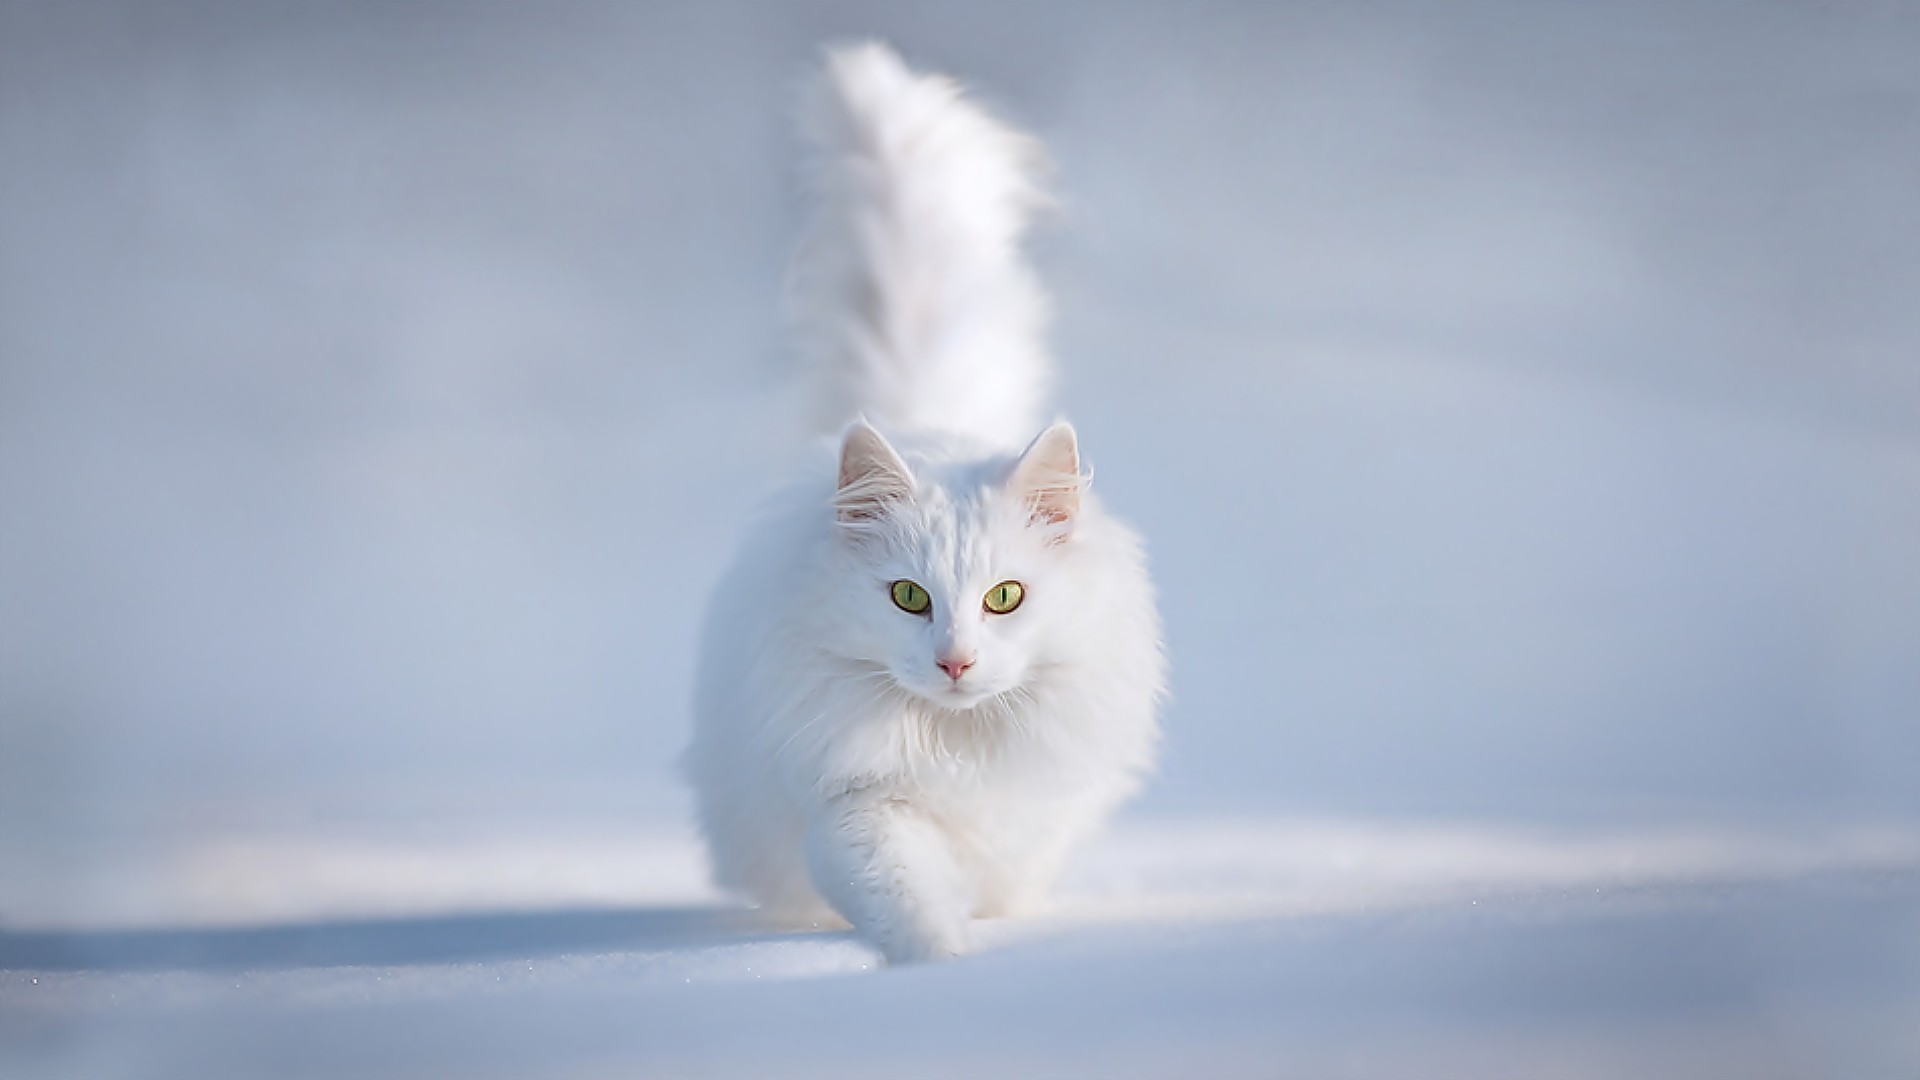 Cute White Persian Cat In Snow Wallpaper High Resolution